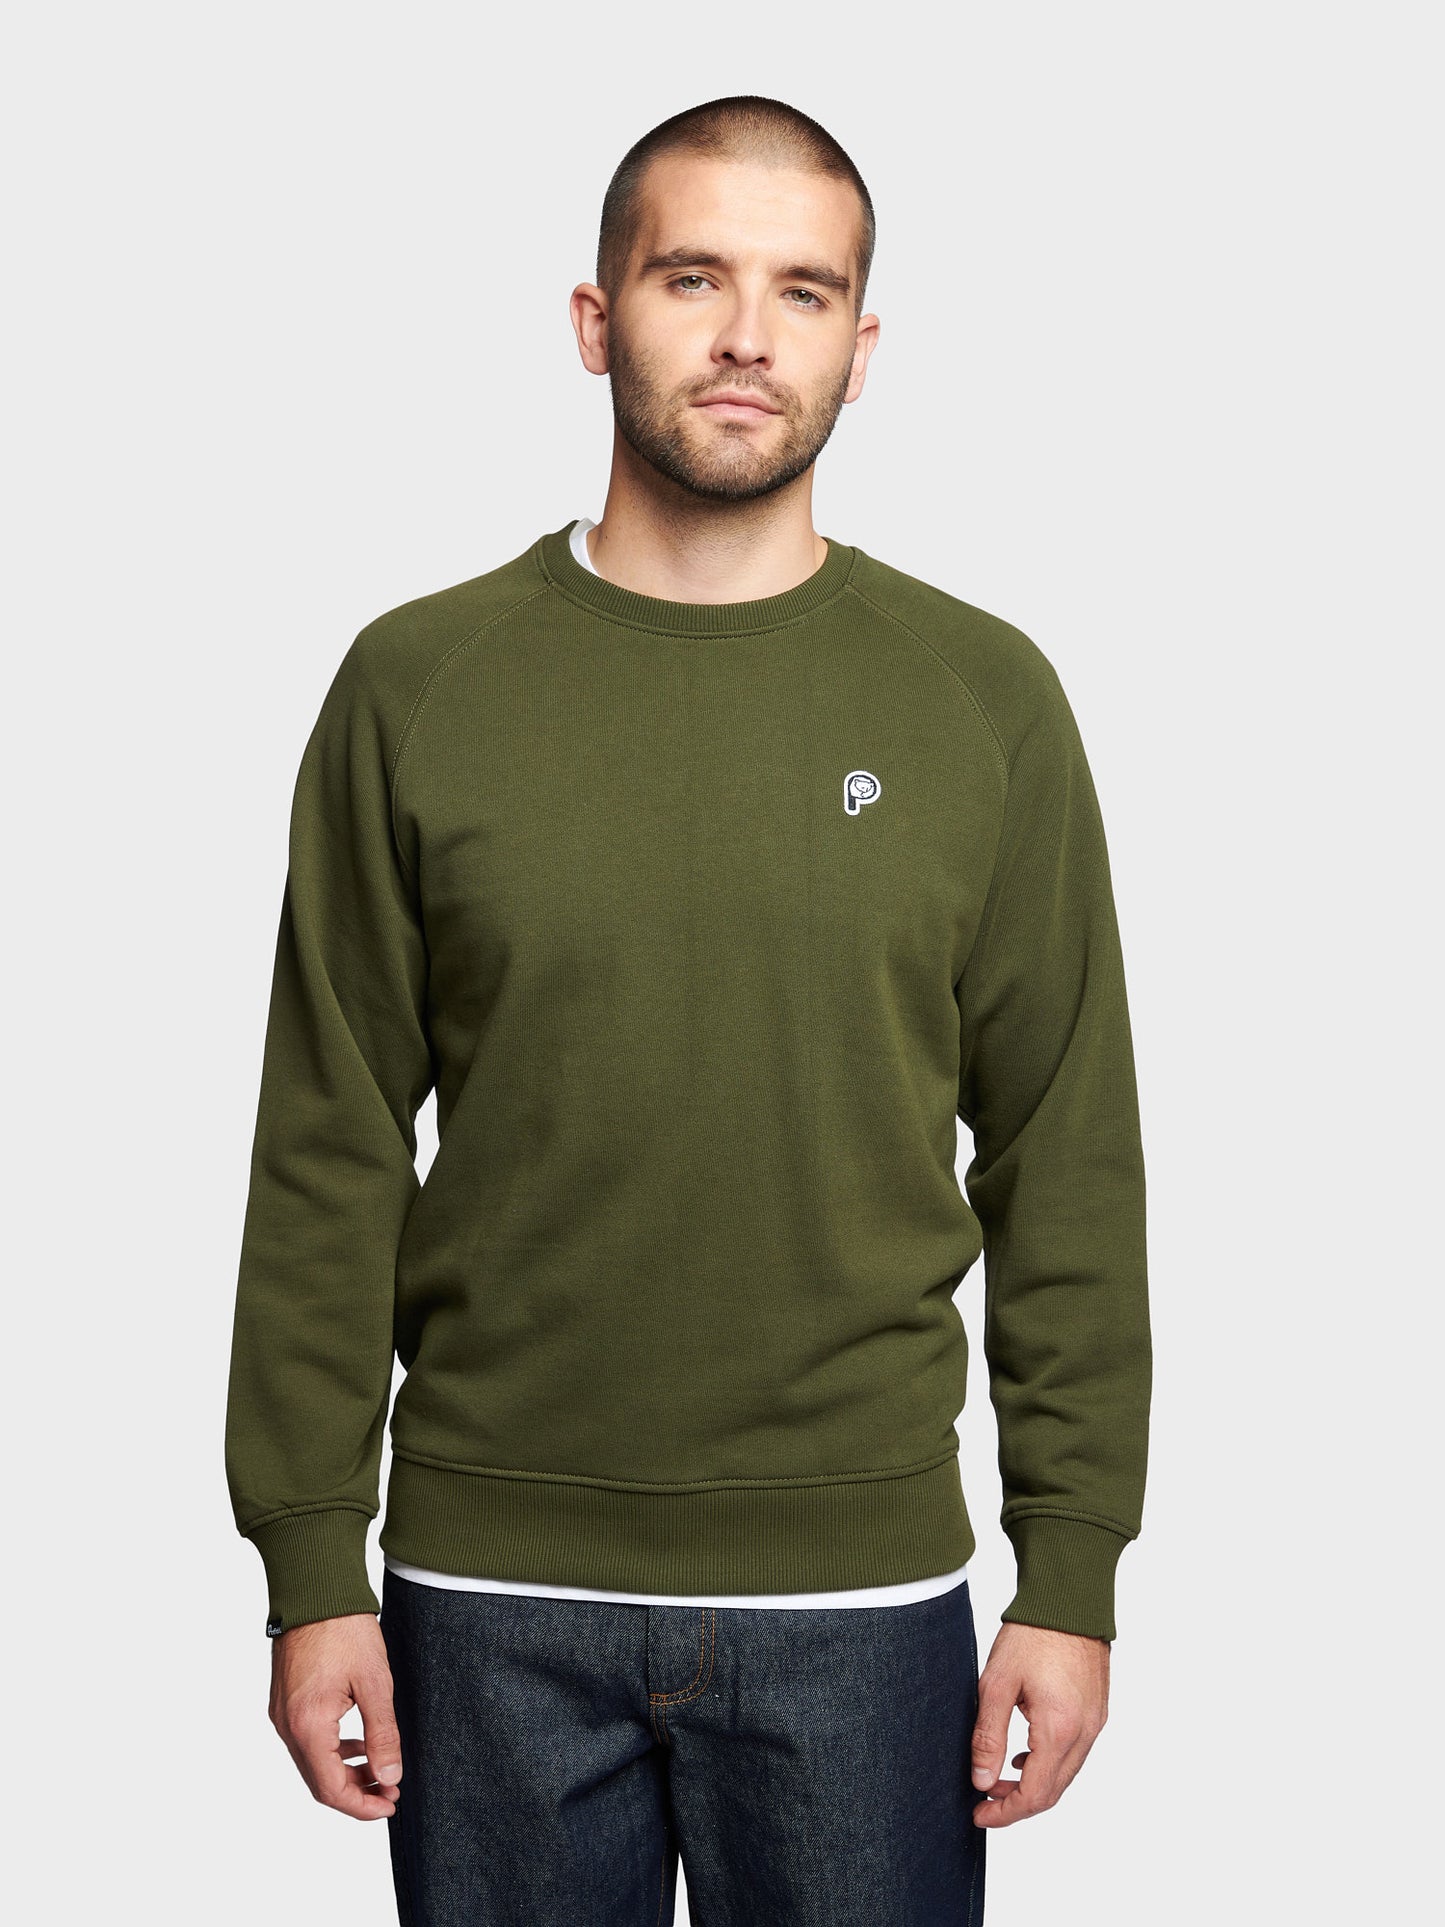 P Bear Sweater in Forest Night